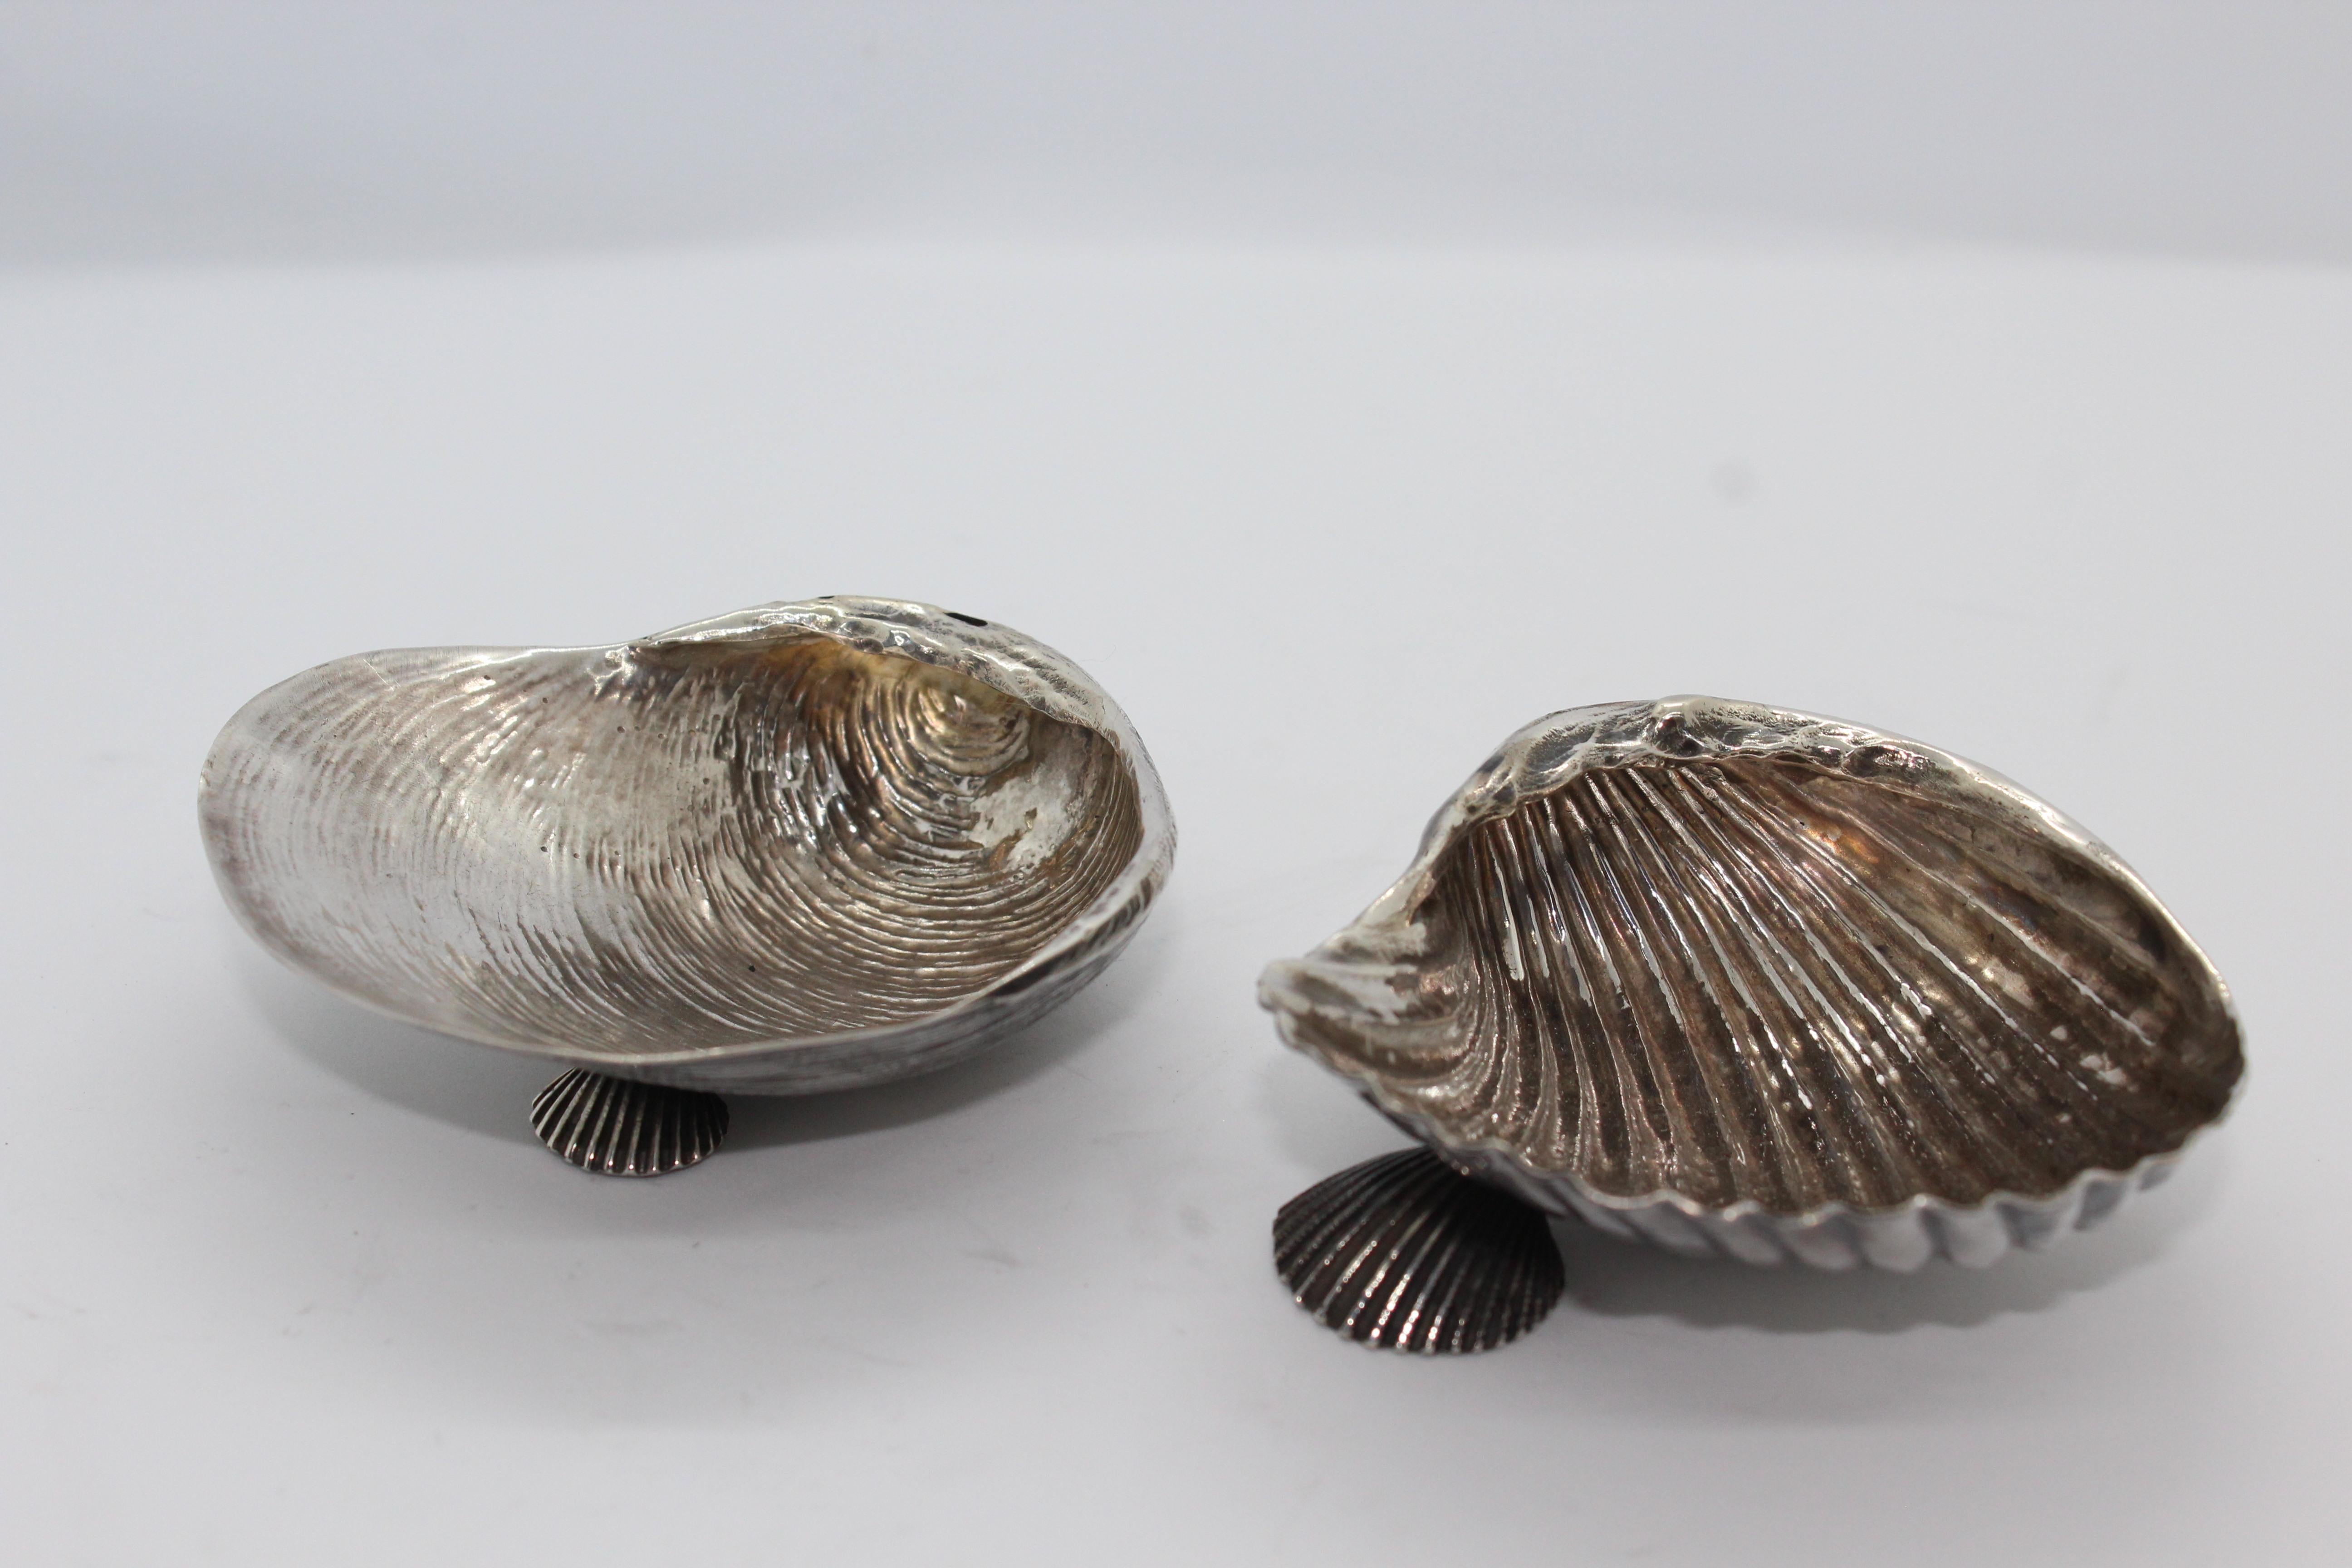 Silver SeaShell, completely produced in Florence, Italy.
Possible to be bought separately or the couple.
Giuliano Foglia is the artist who chiselled this pure silver piece.

